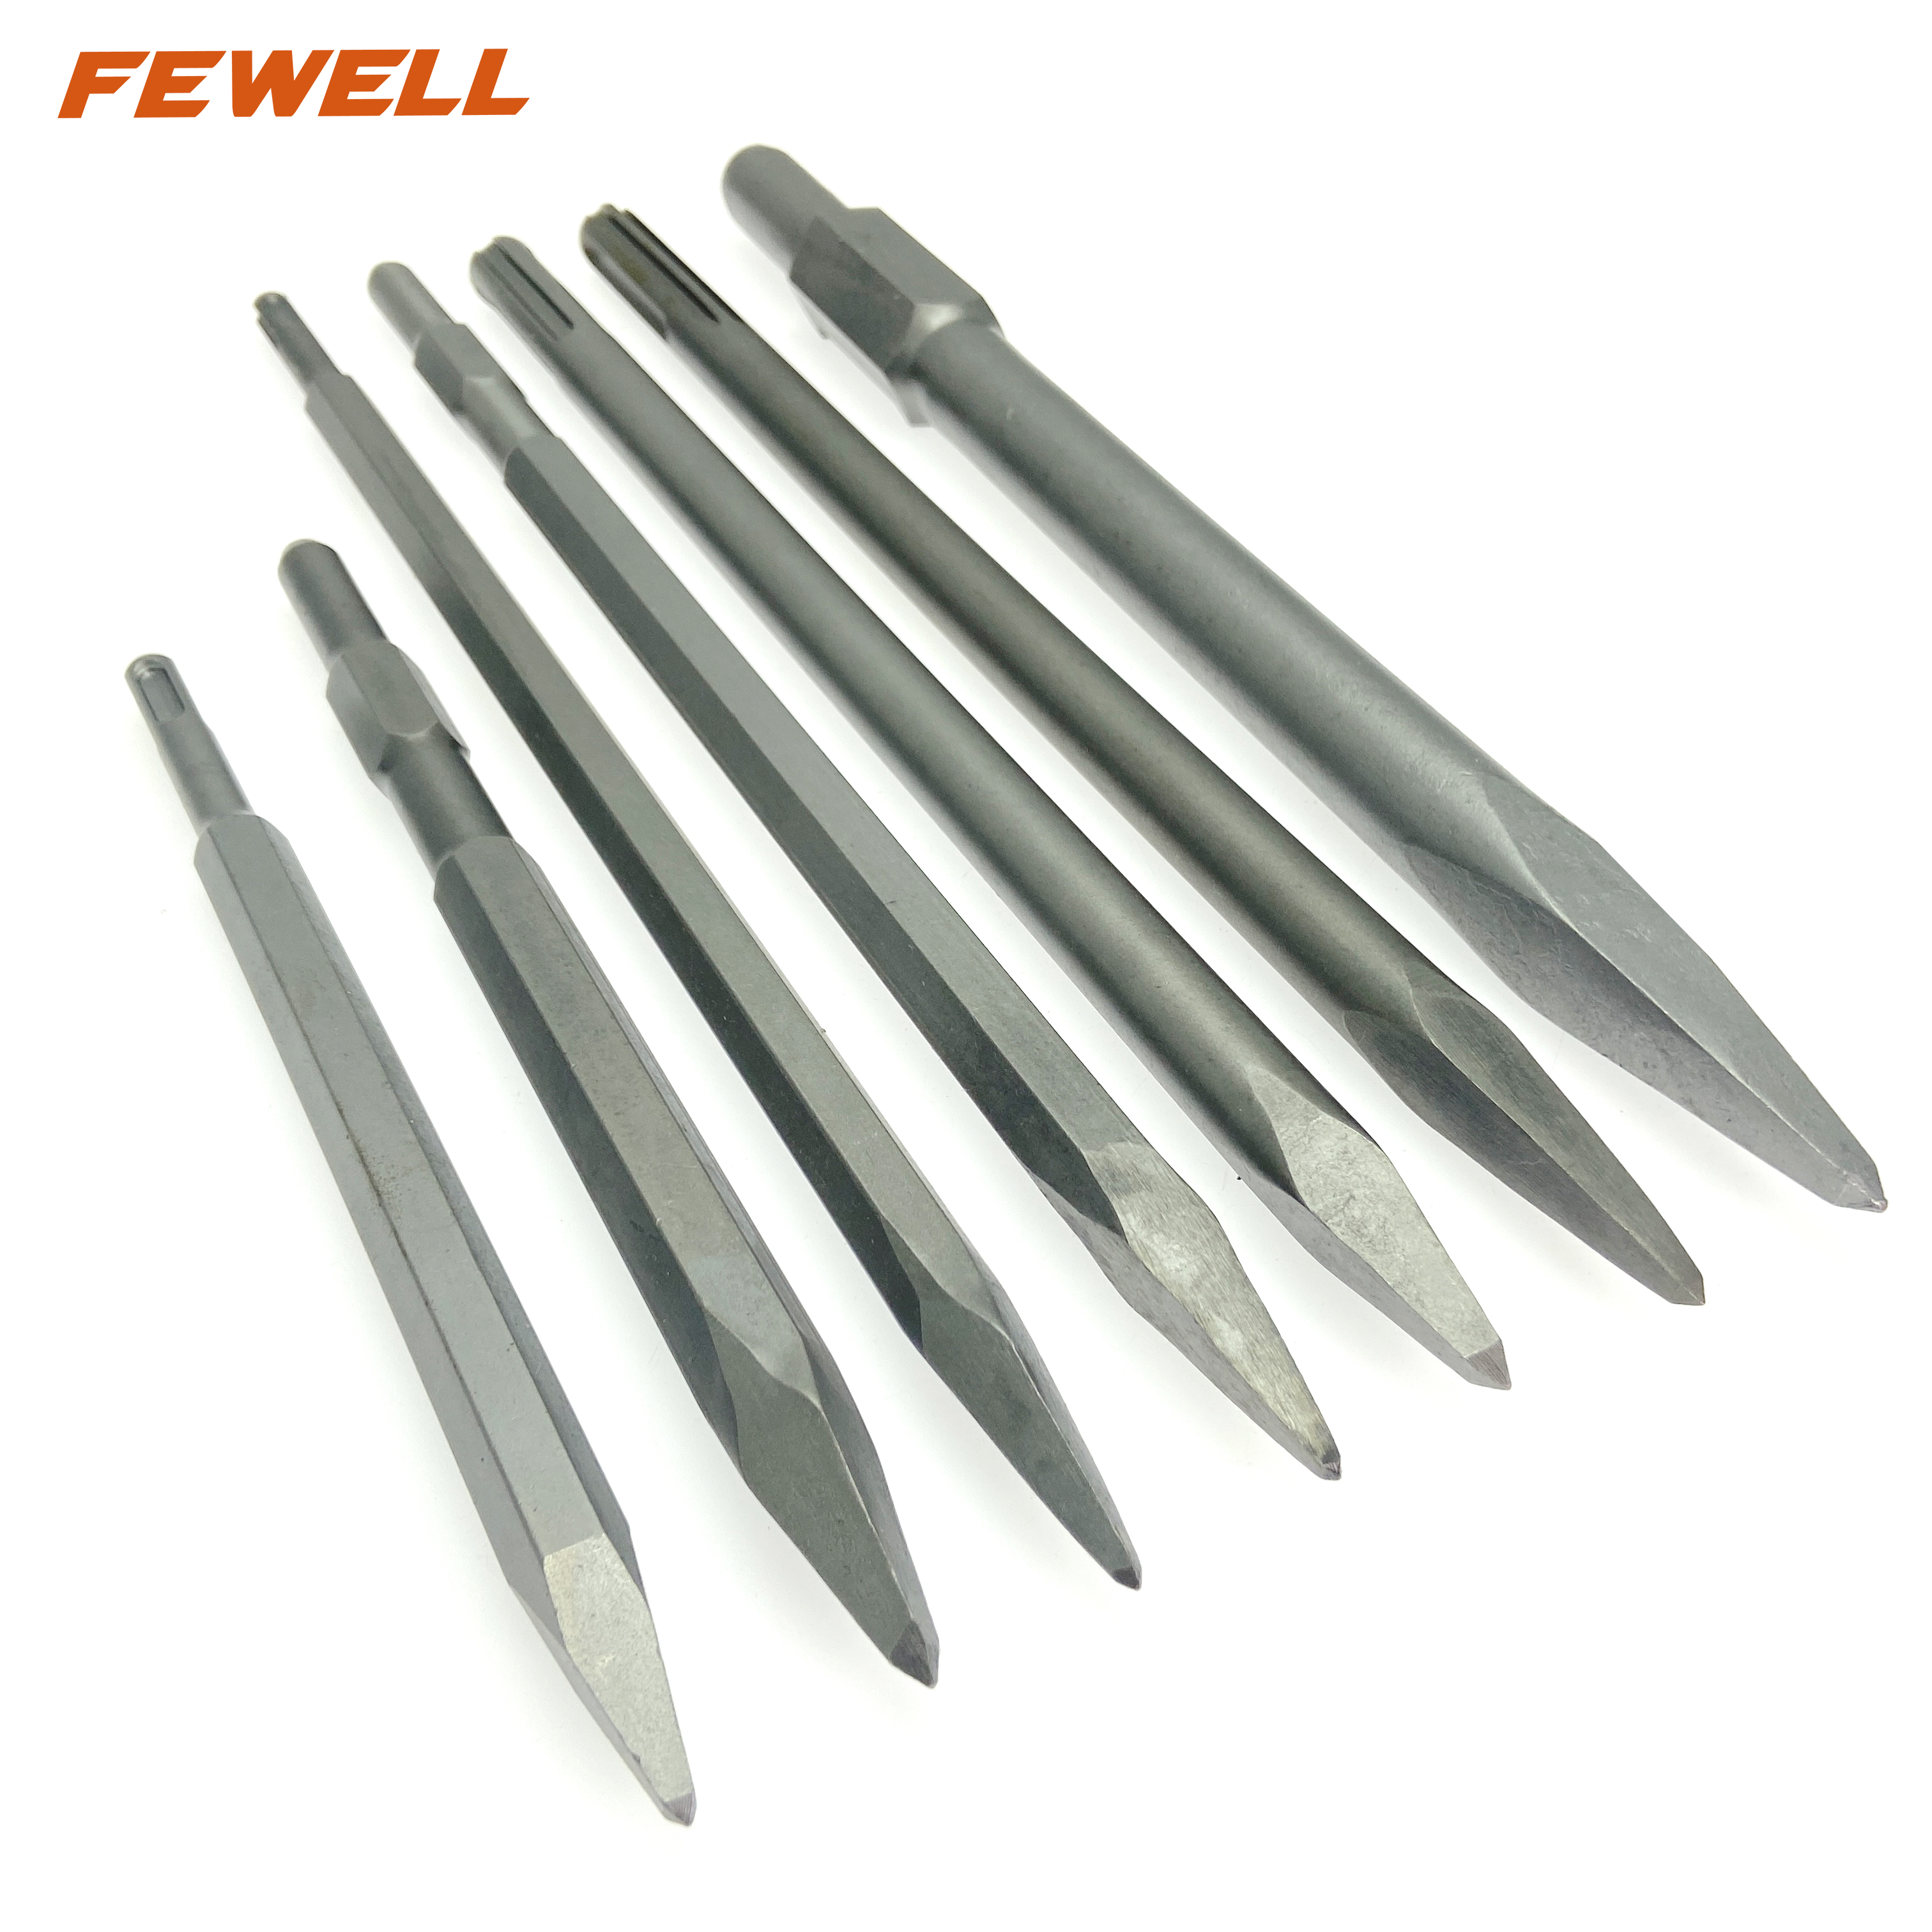 High quality 18x400mm SDS Max Electric hammer drill point chisel for Tile Masonry Concrete Brick stone